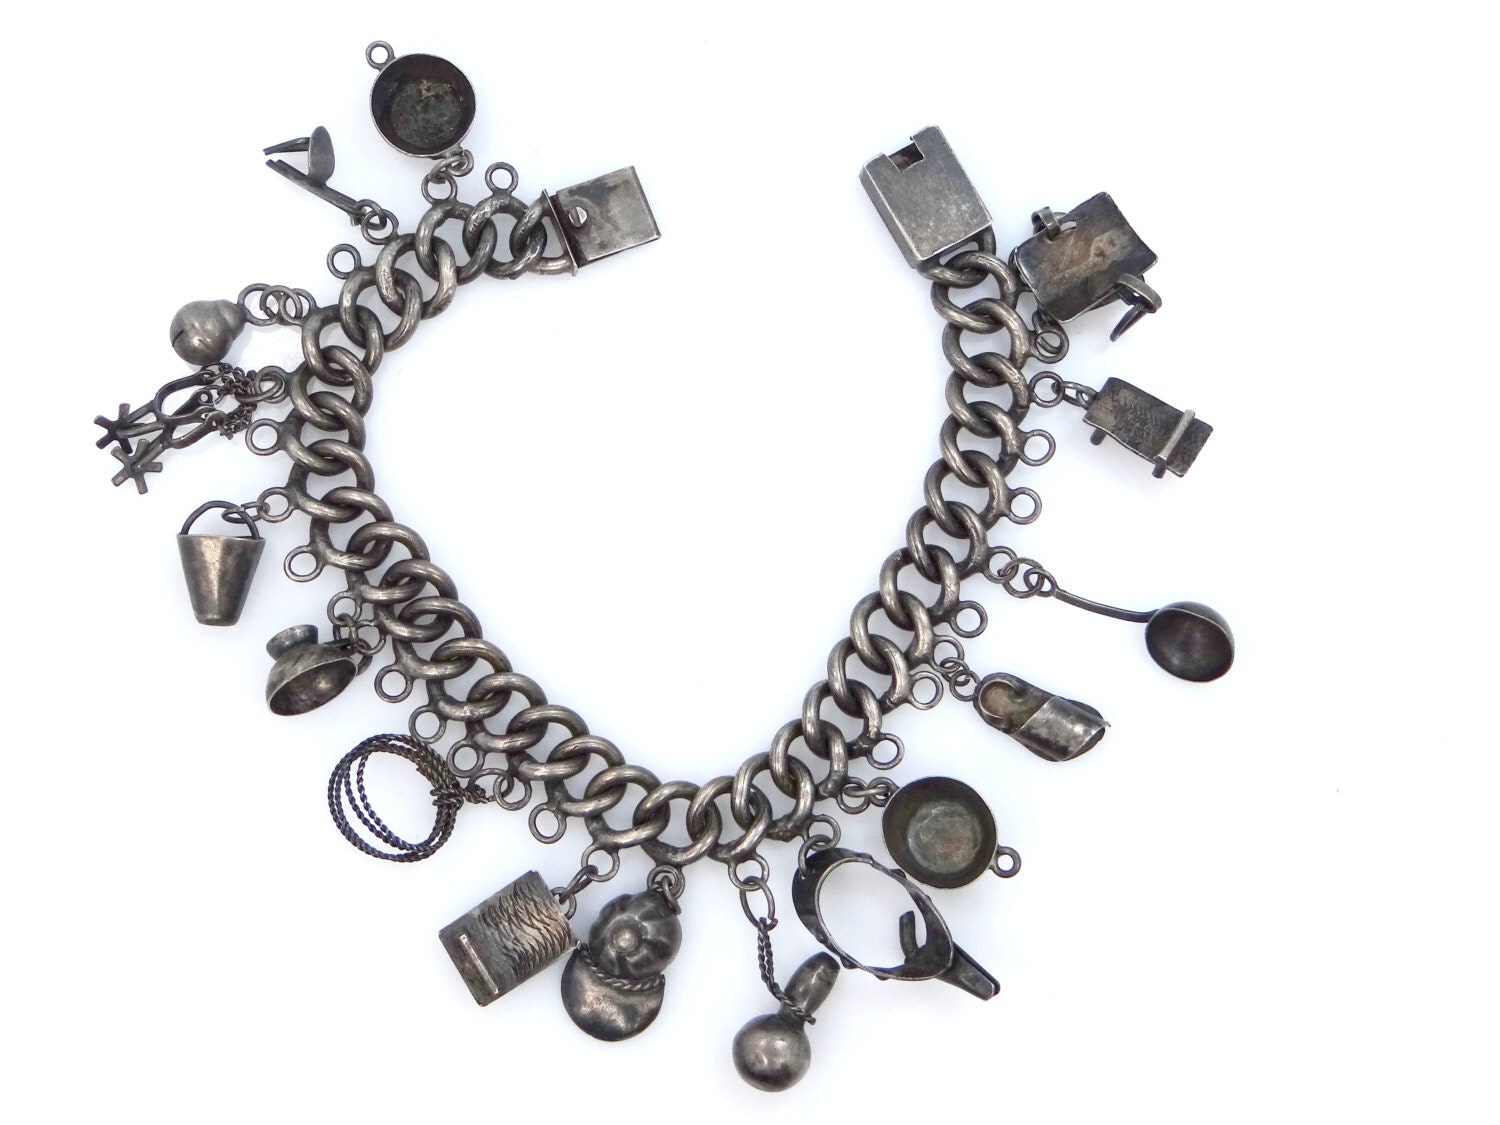 1930's Mexico Sterling Silver Charm Bracelet with Unusual